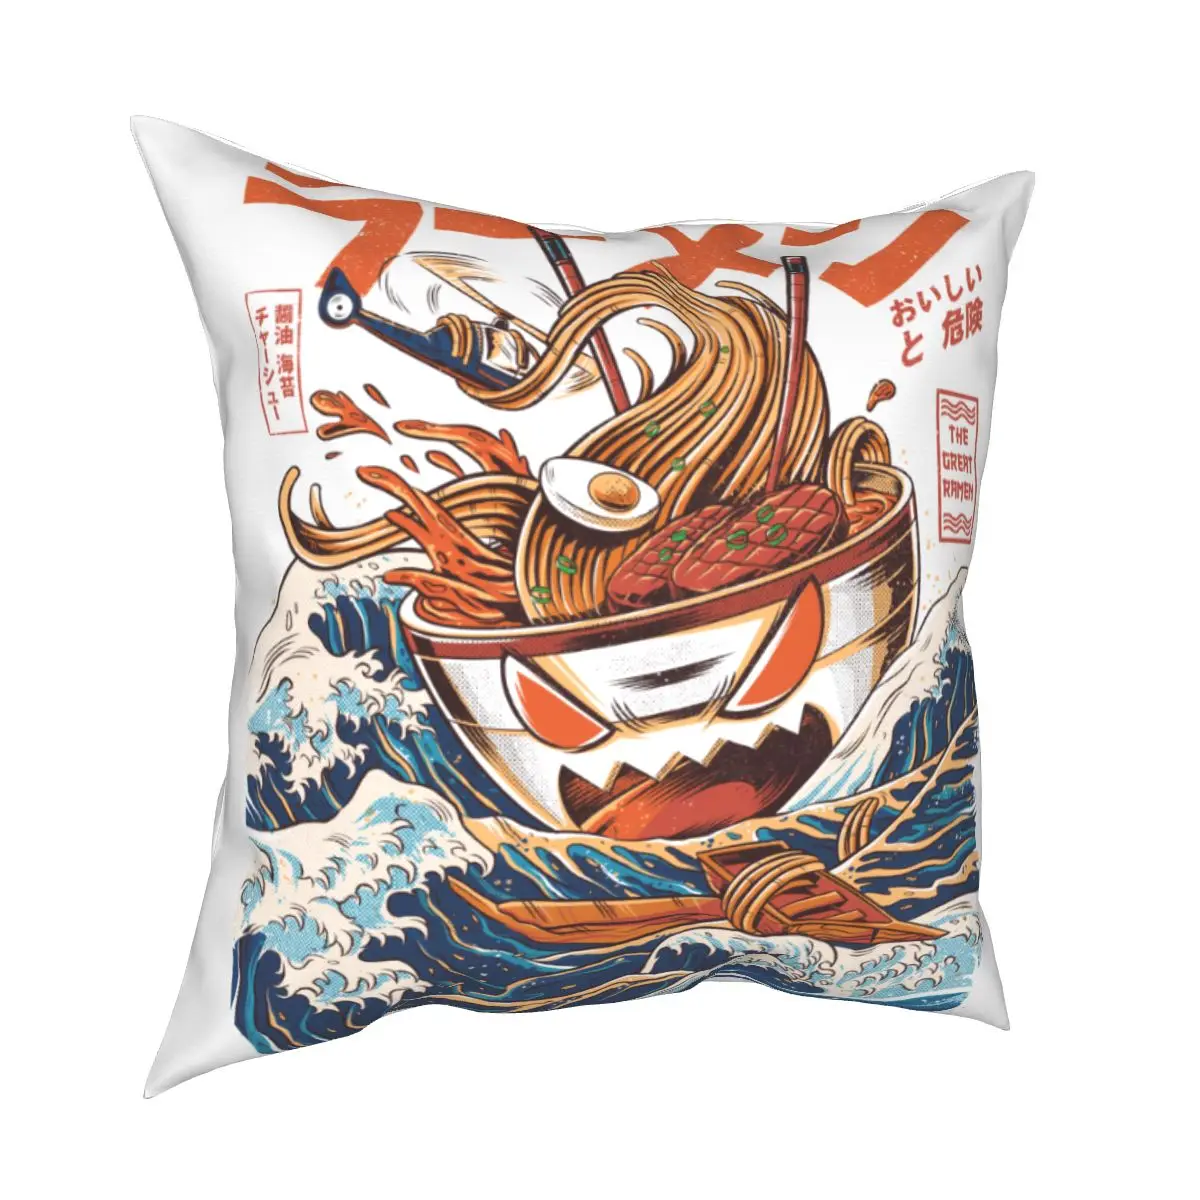 

The Great Ramen Way From Kanagawa Pillow Cover Print Fabric Pillows Coverage Decoration Retro Pillows Case Coverage House zipper